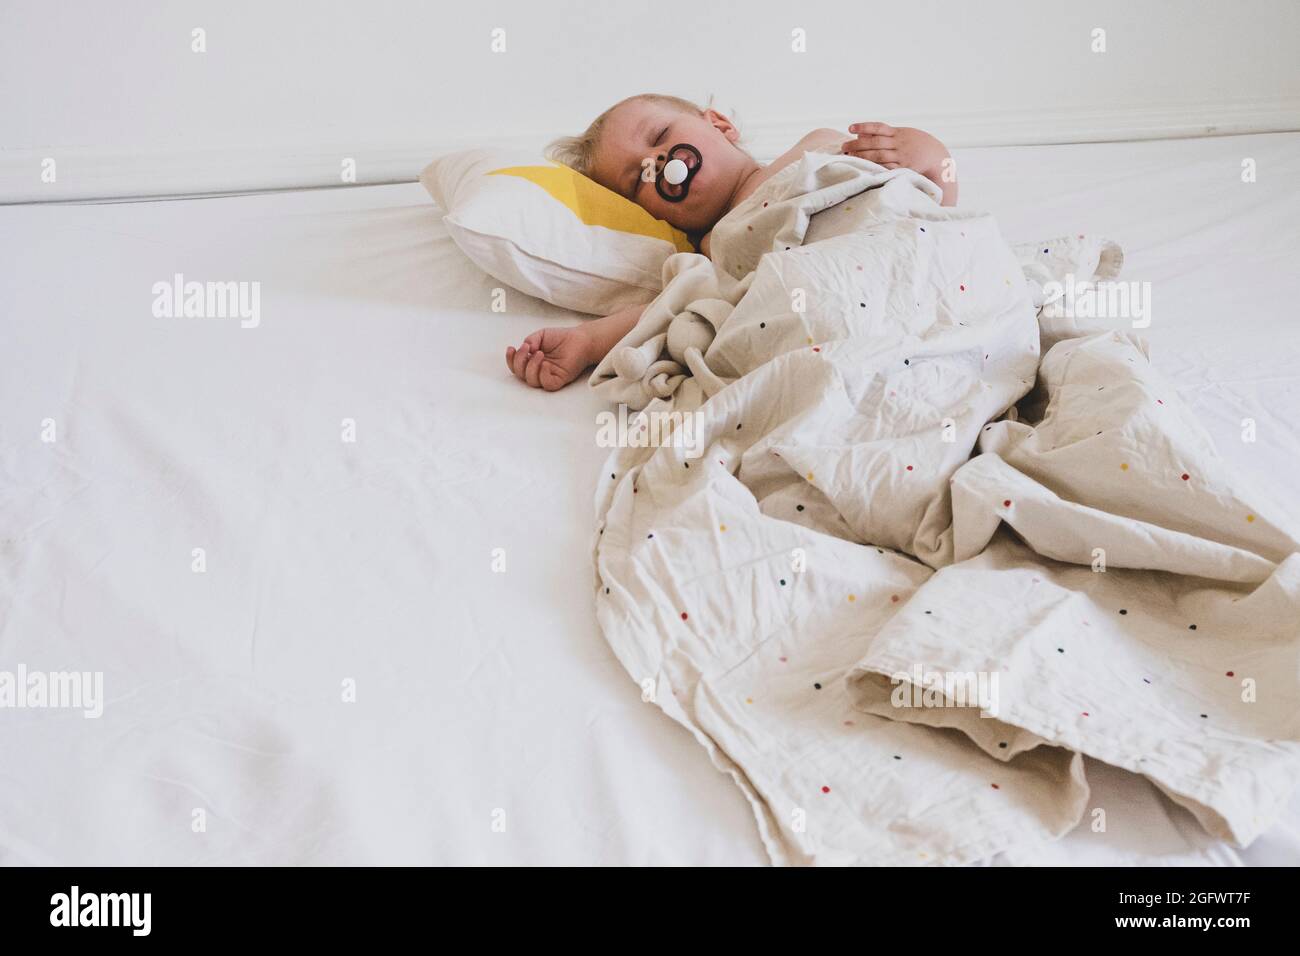 Toddler sleeping in bed Banque D'Images